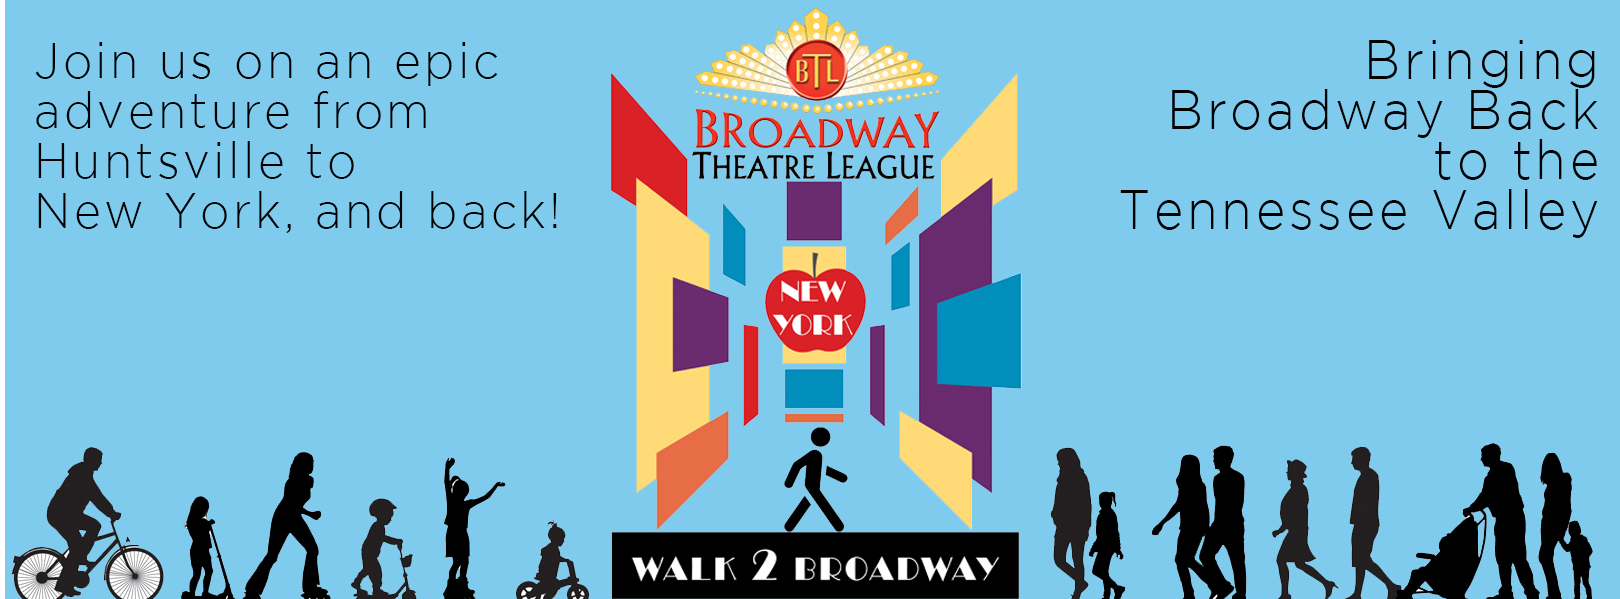 Broadway Theatre League Walk 2 Broadway (and back!)